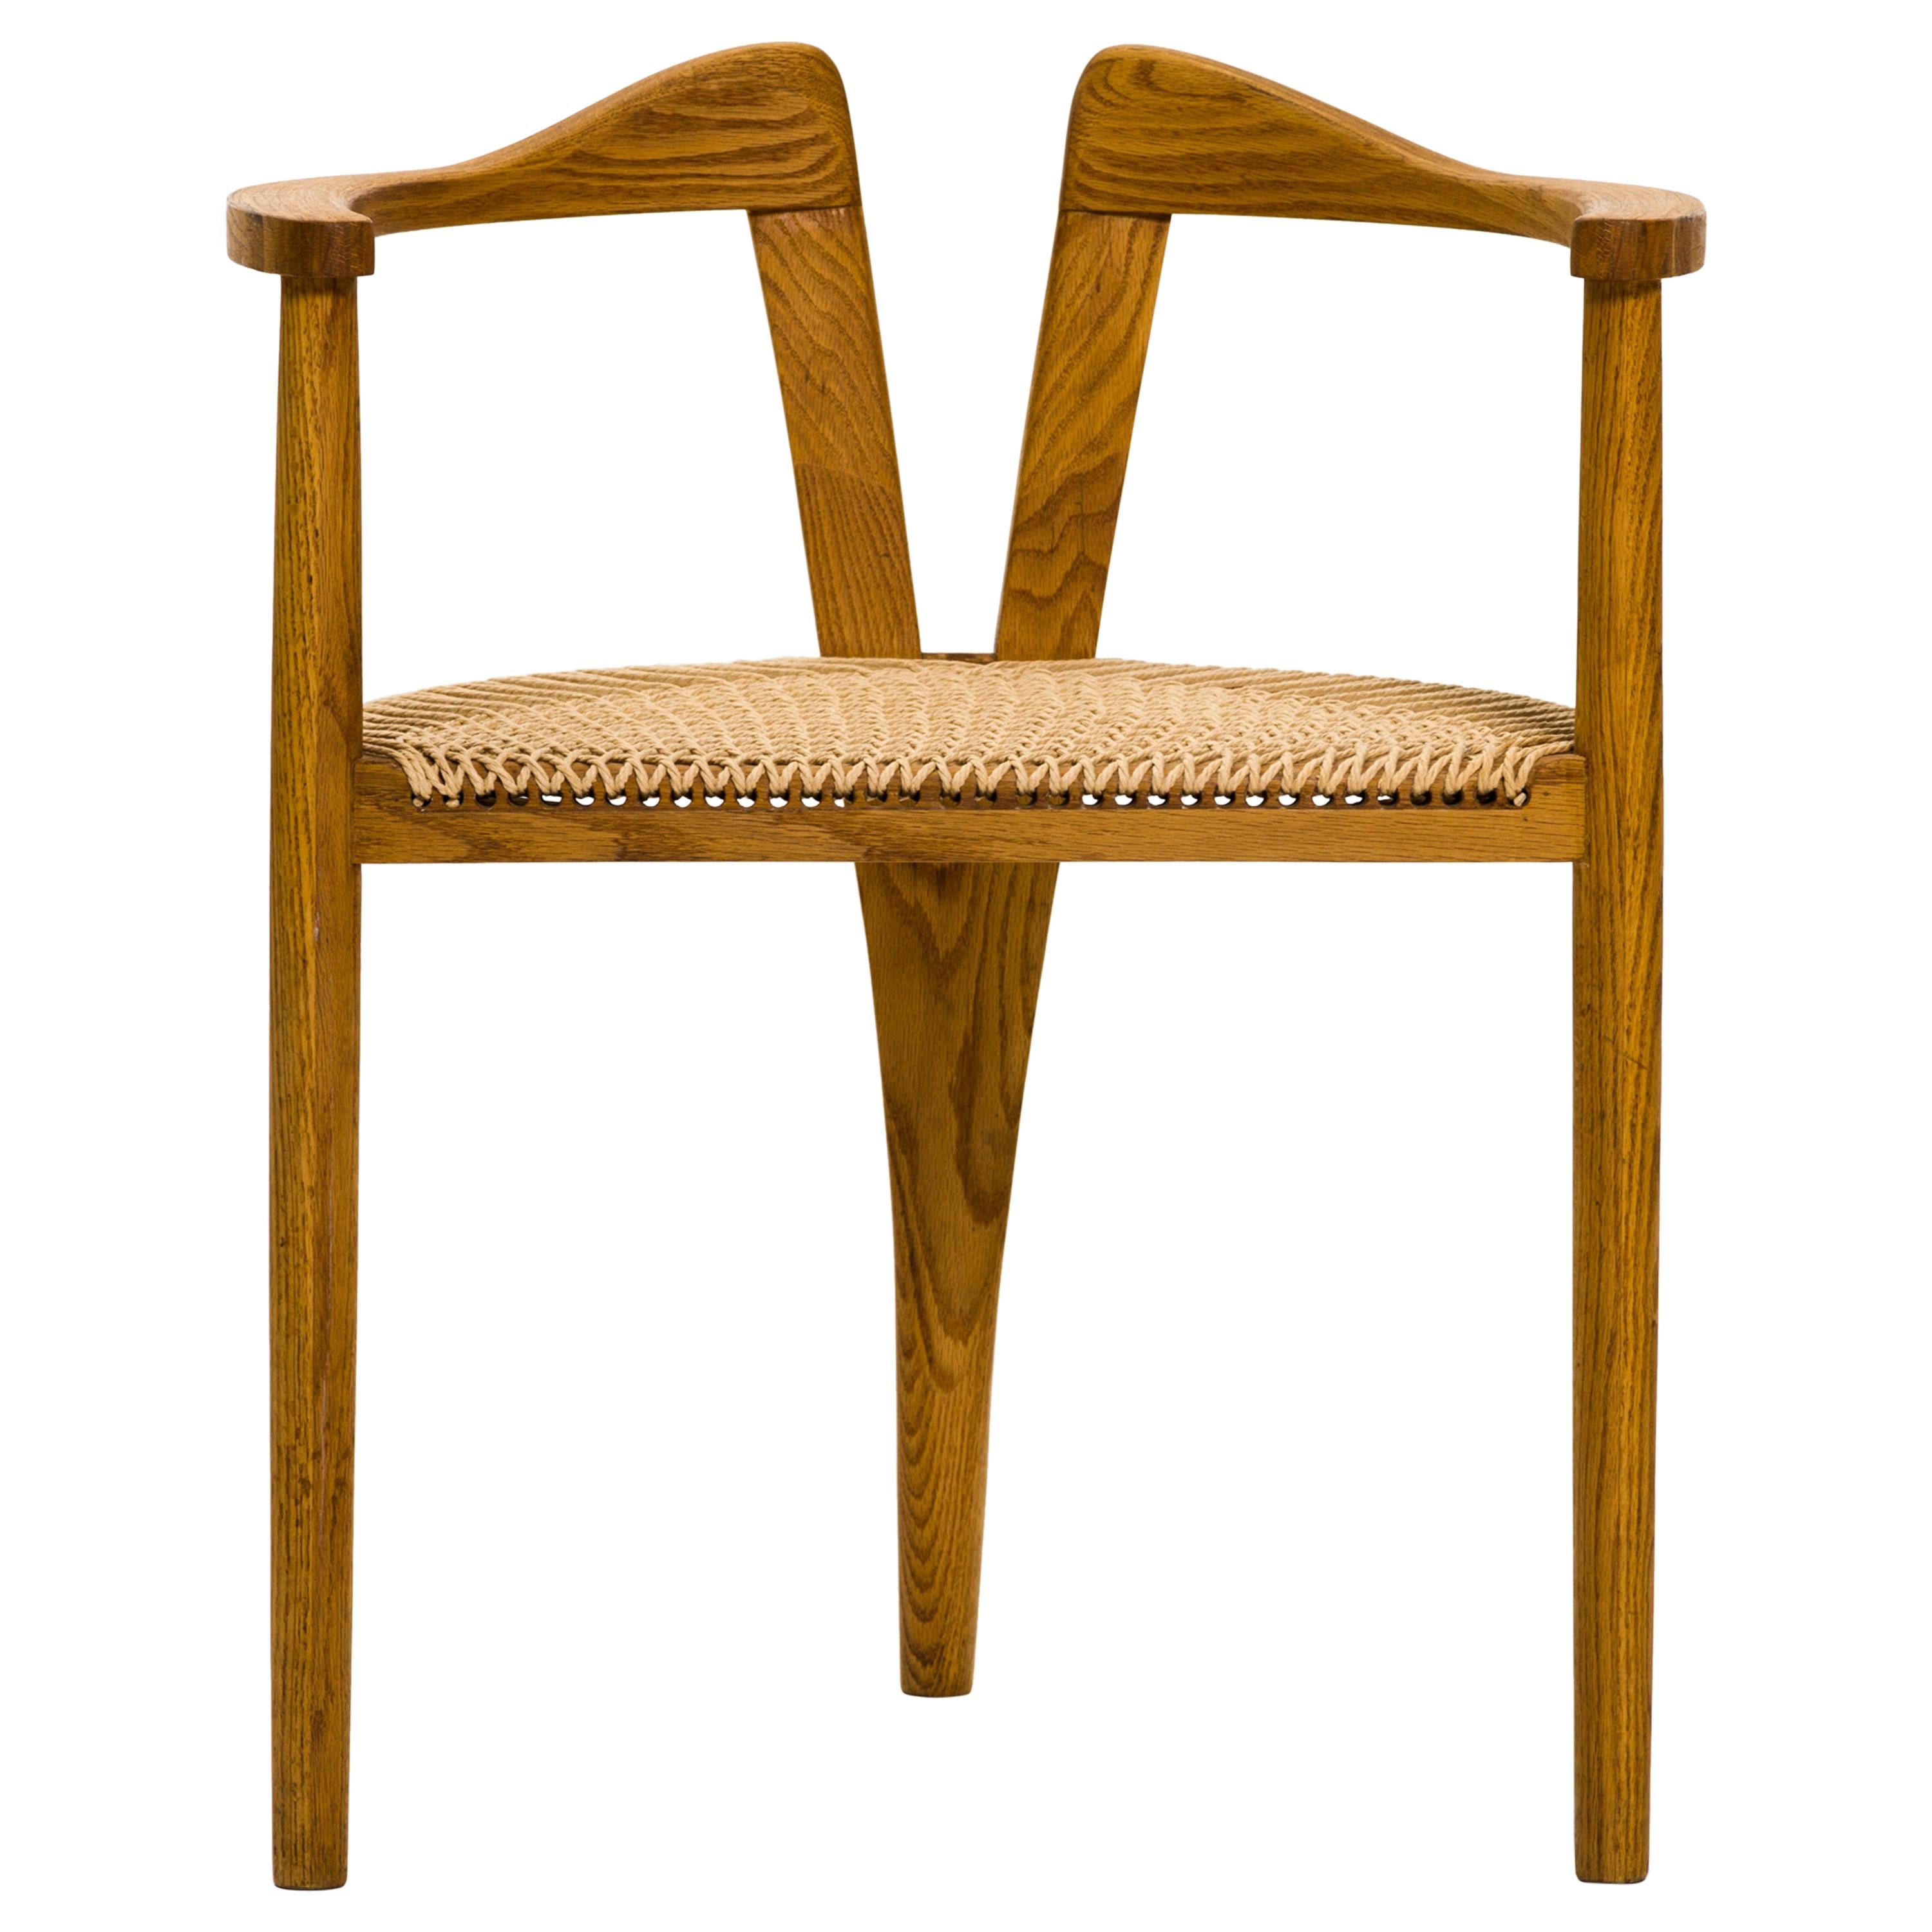 American Studio Craft Tri-Leg Chair in Oak with Woven Seat after Hans Wegner